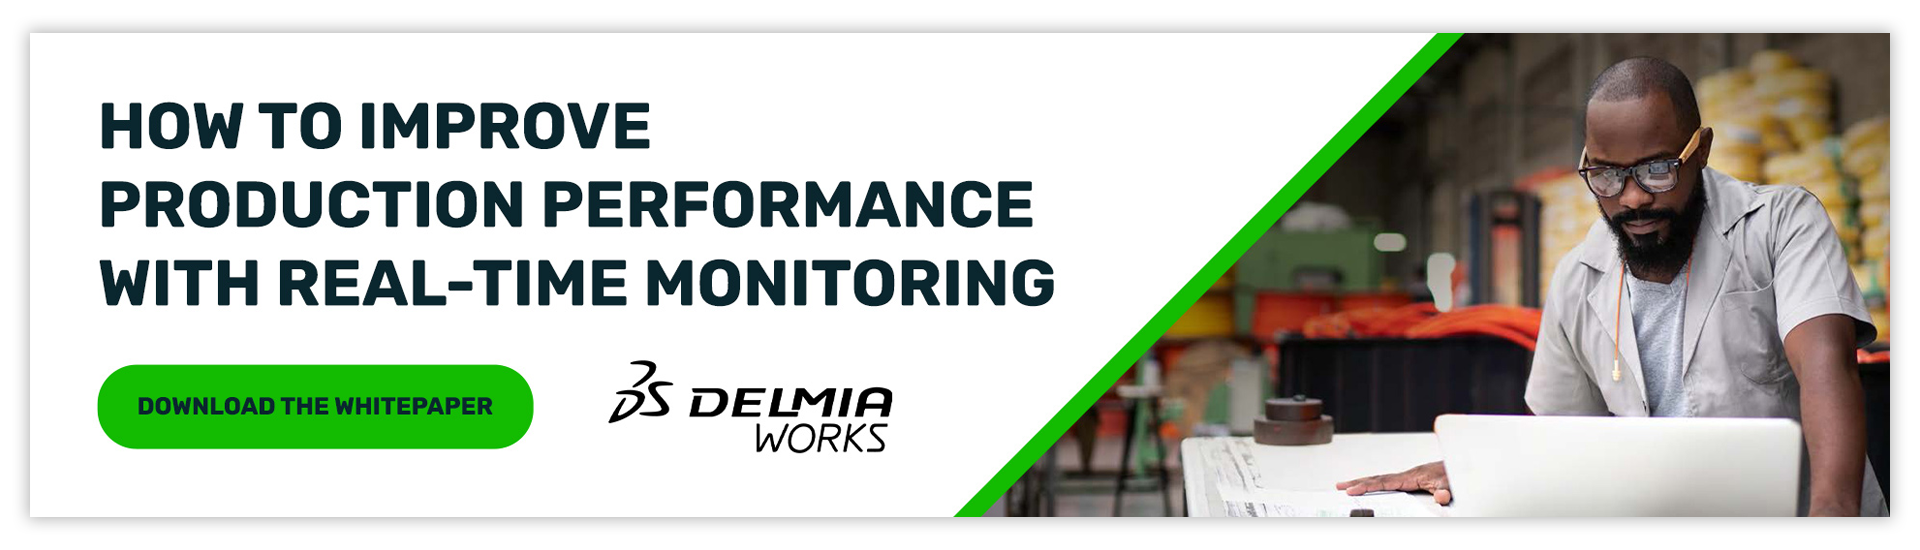 Download-Real-Time-Monitoring-Whitepaper-DELMIA-Works-Proximity-Shadow